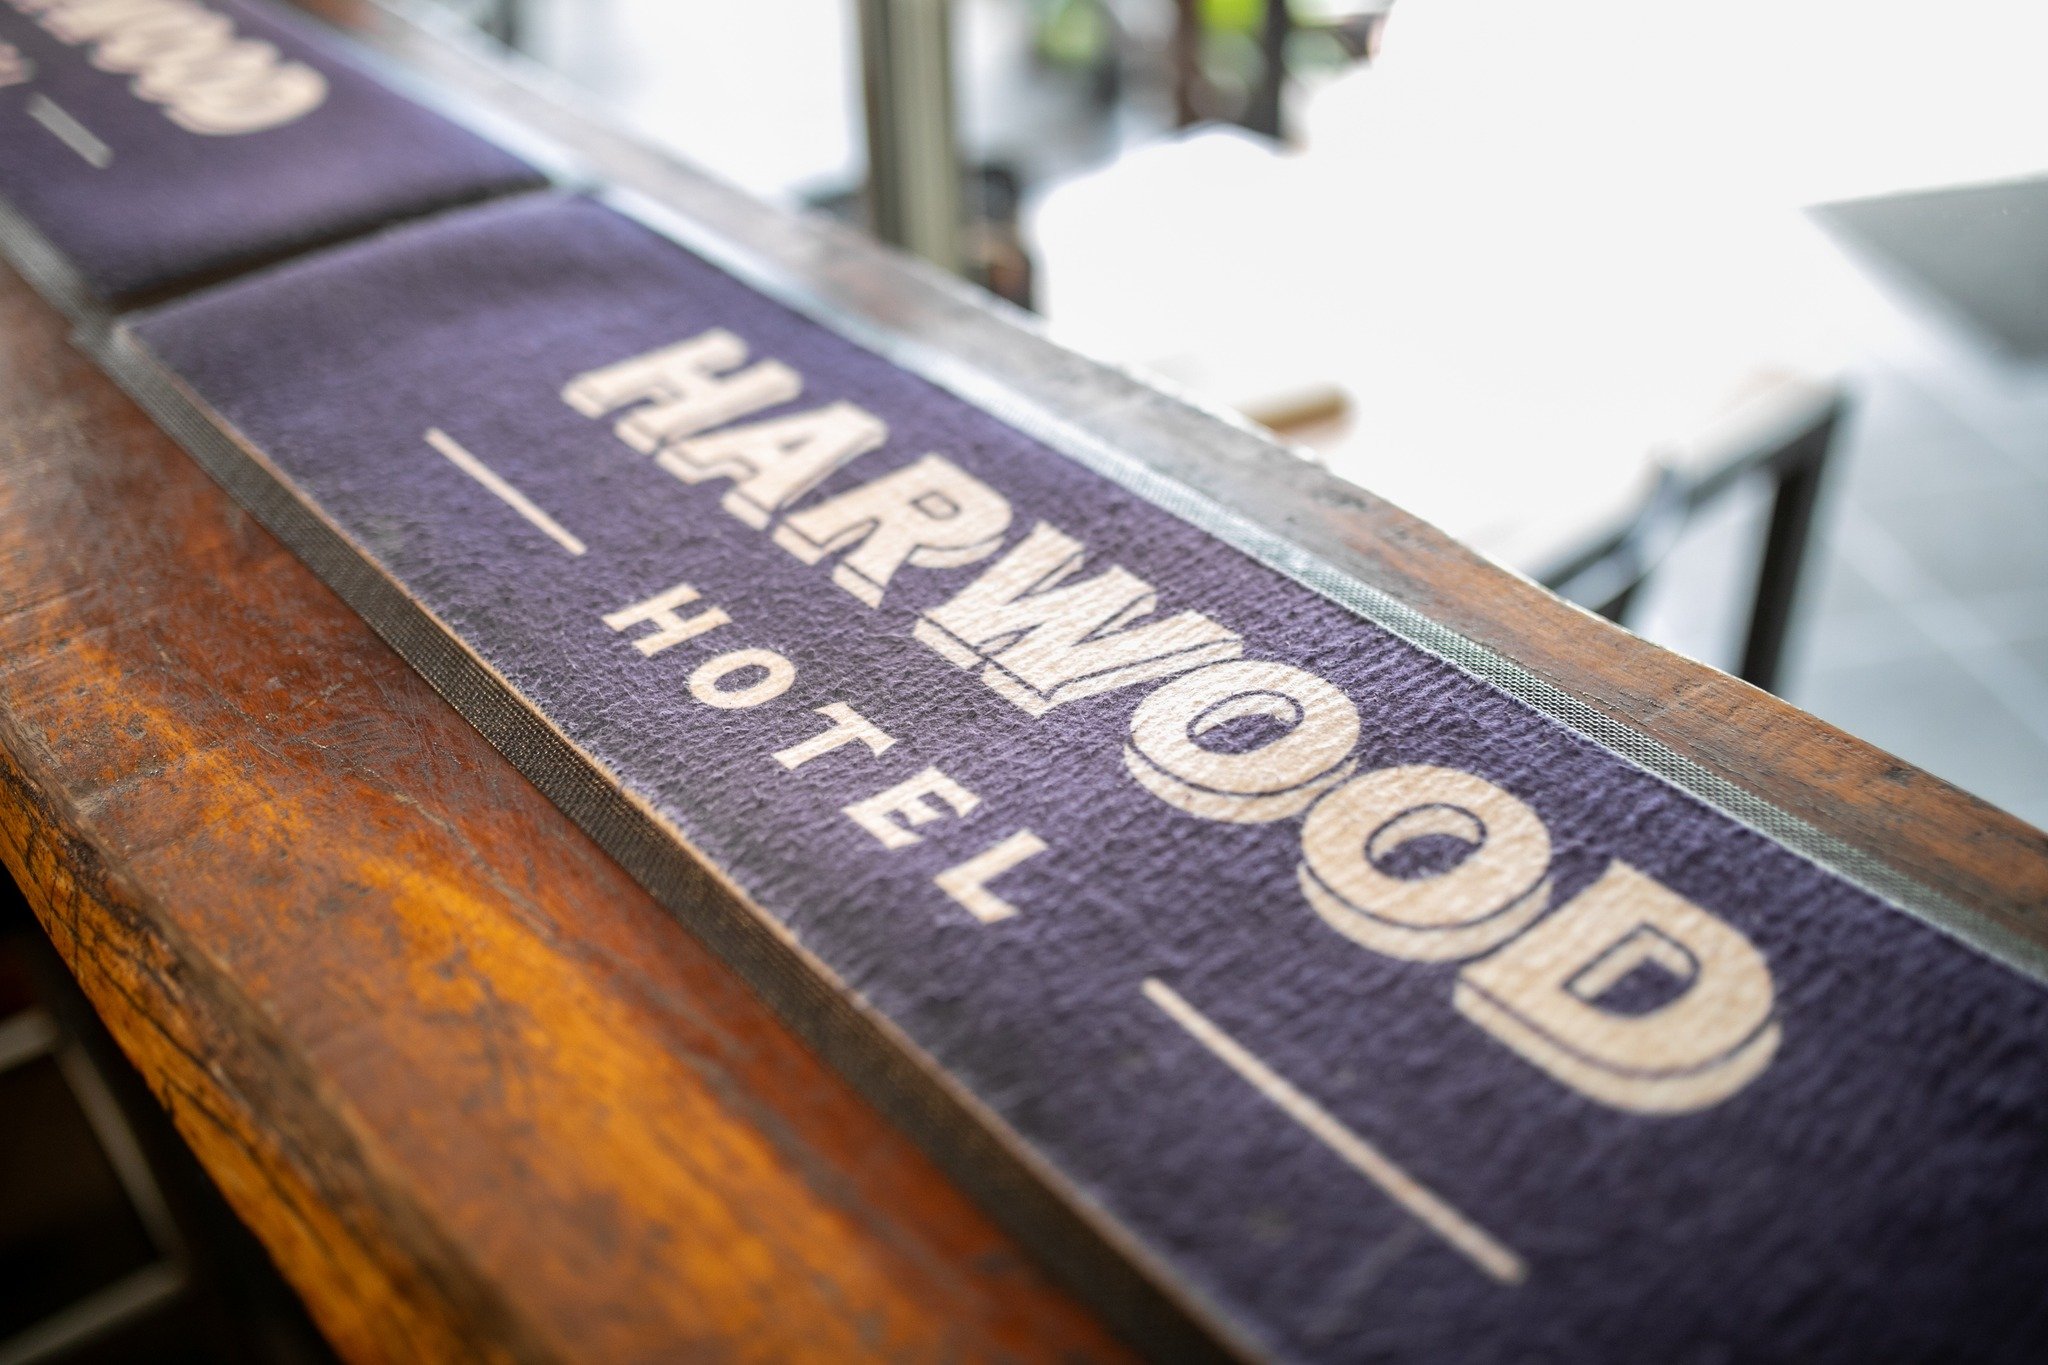 Harwood happy hour! 

Drag your work mates to the pub when you clock off, it&rsquo;s beer time. 

Come get a $5 beer!

#HarwoodHotel #VisitNSW #CountryPub